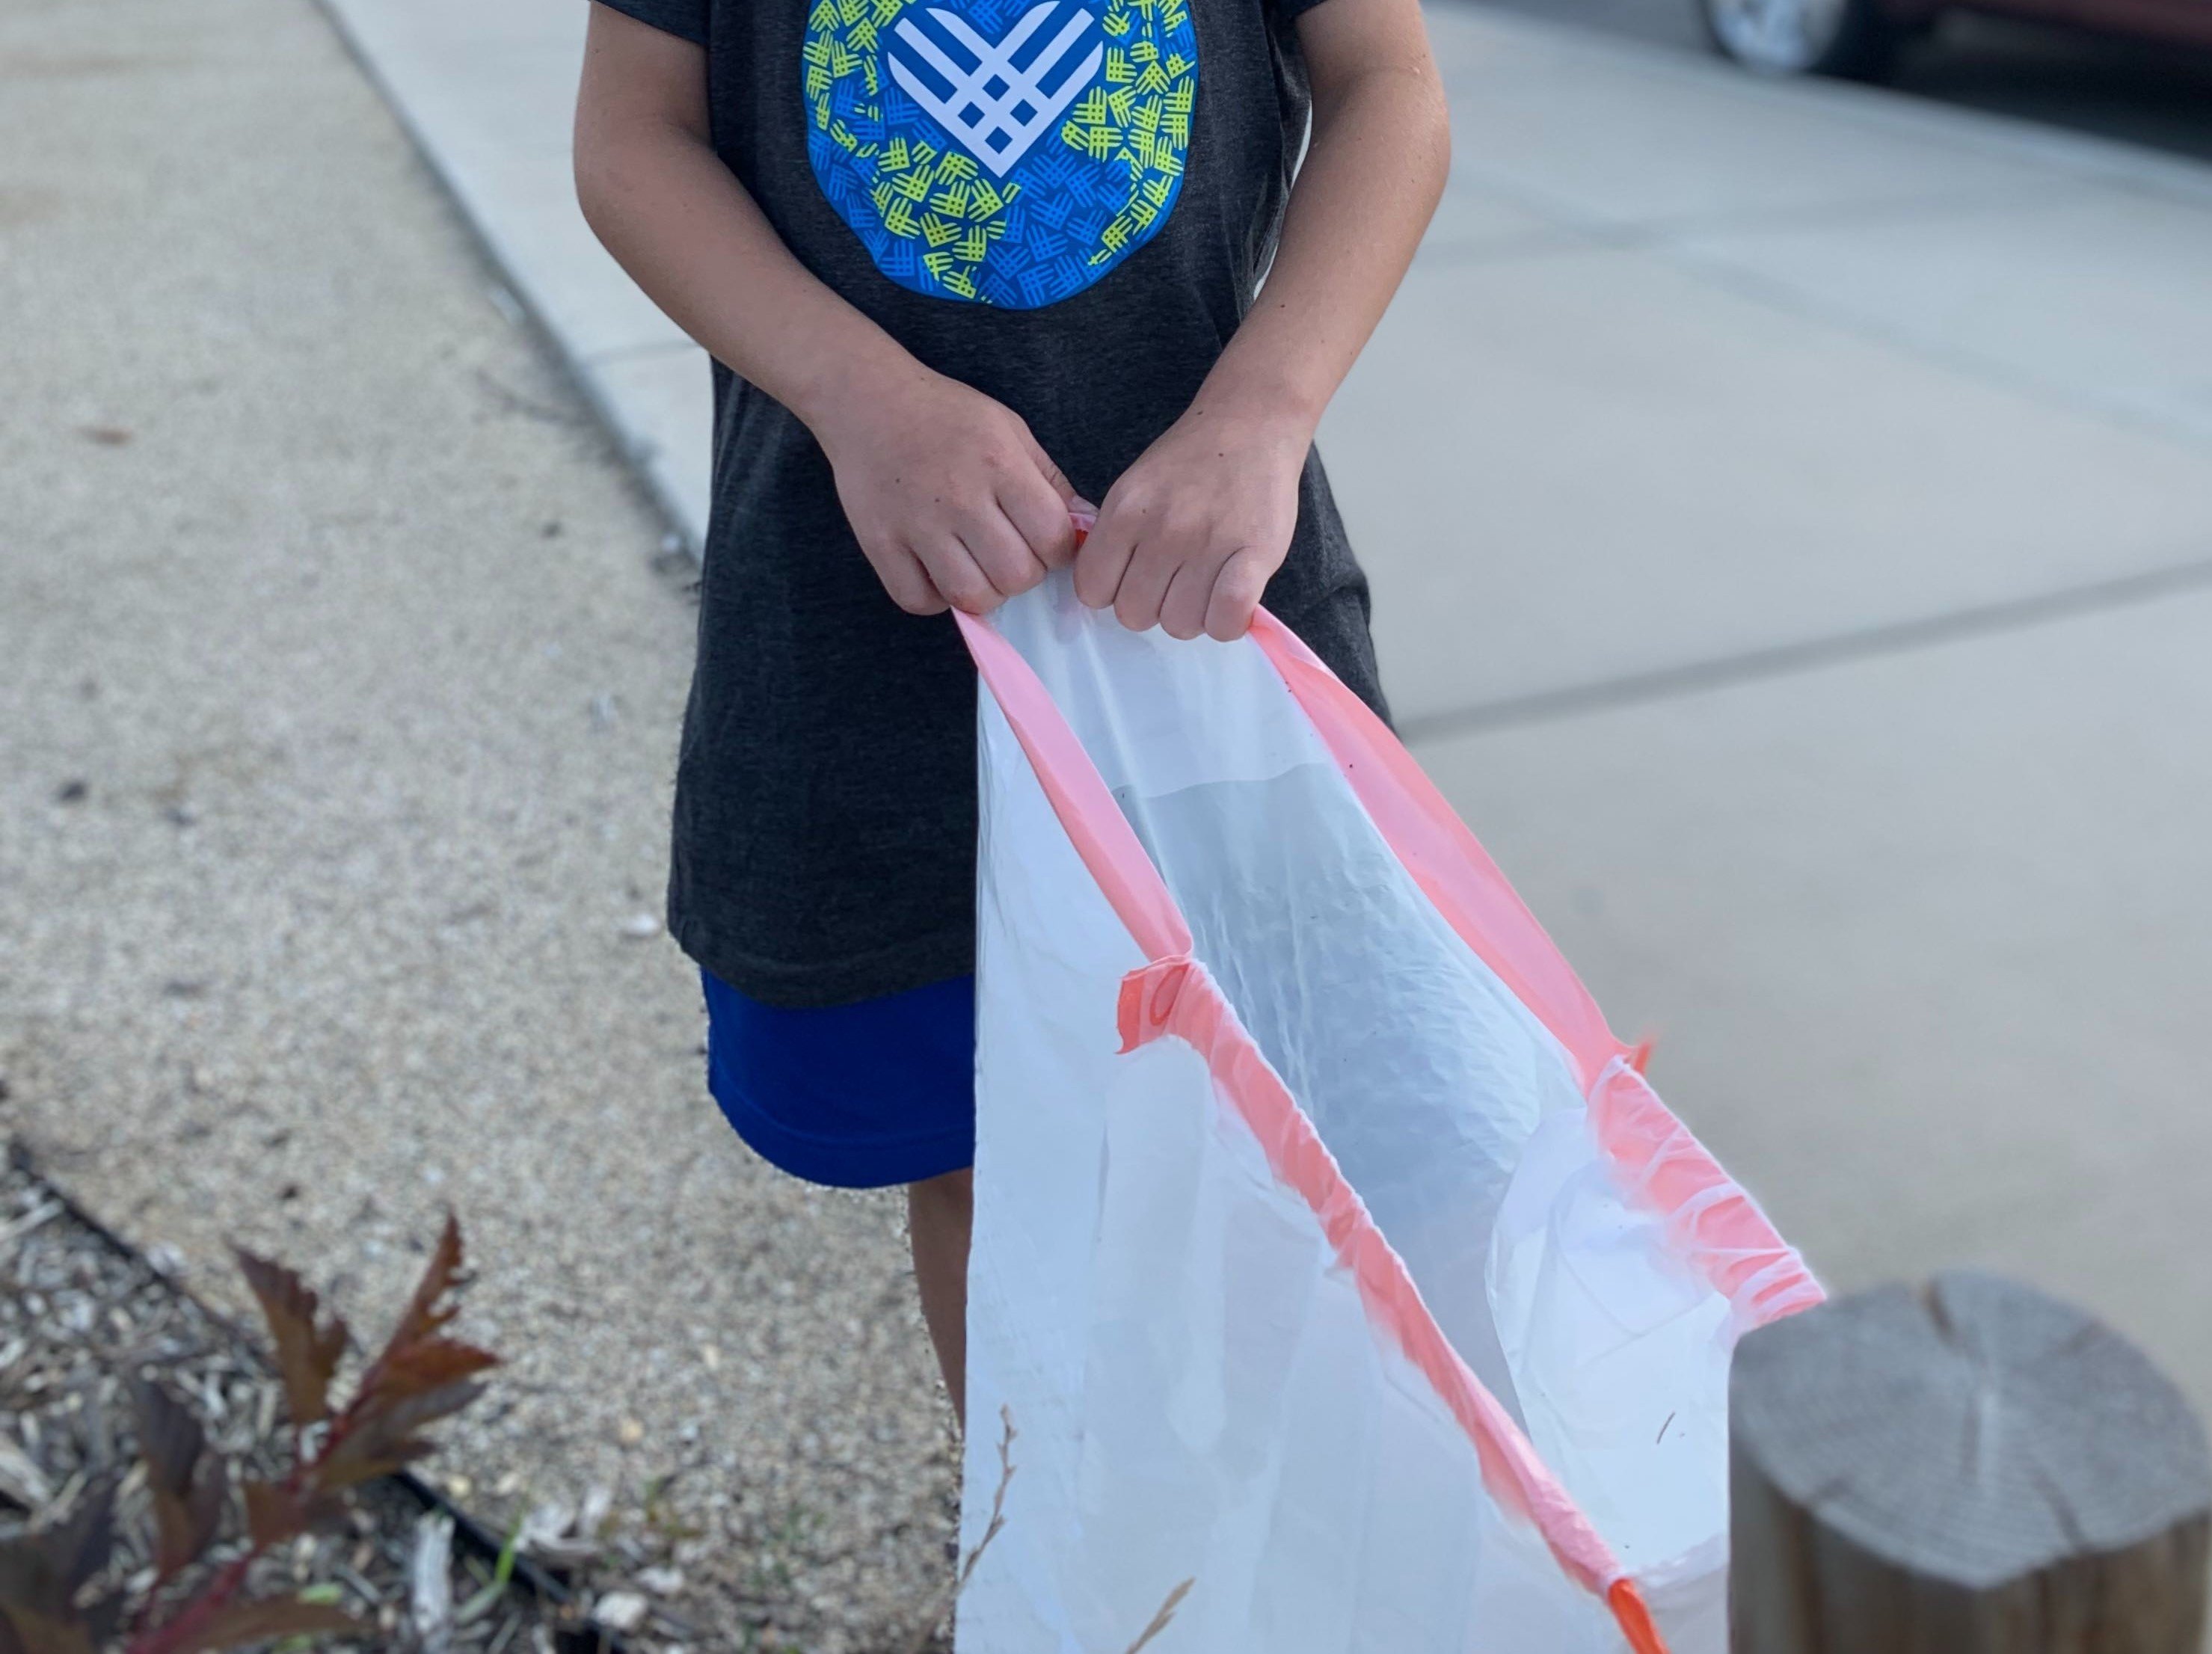 The boy carried shopping bags for elderly shoppers in exchange for $3. | Source: Pexels